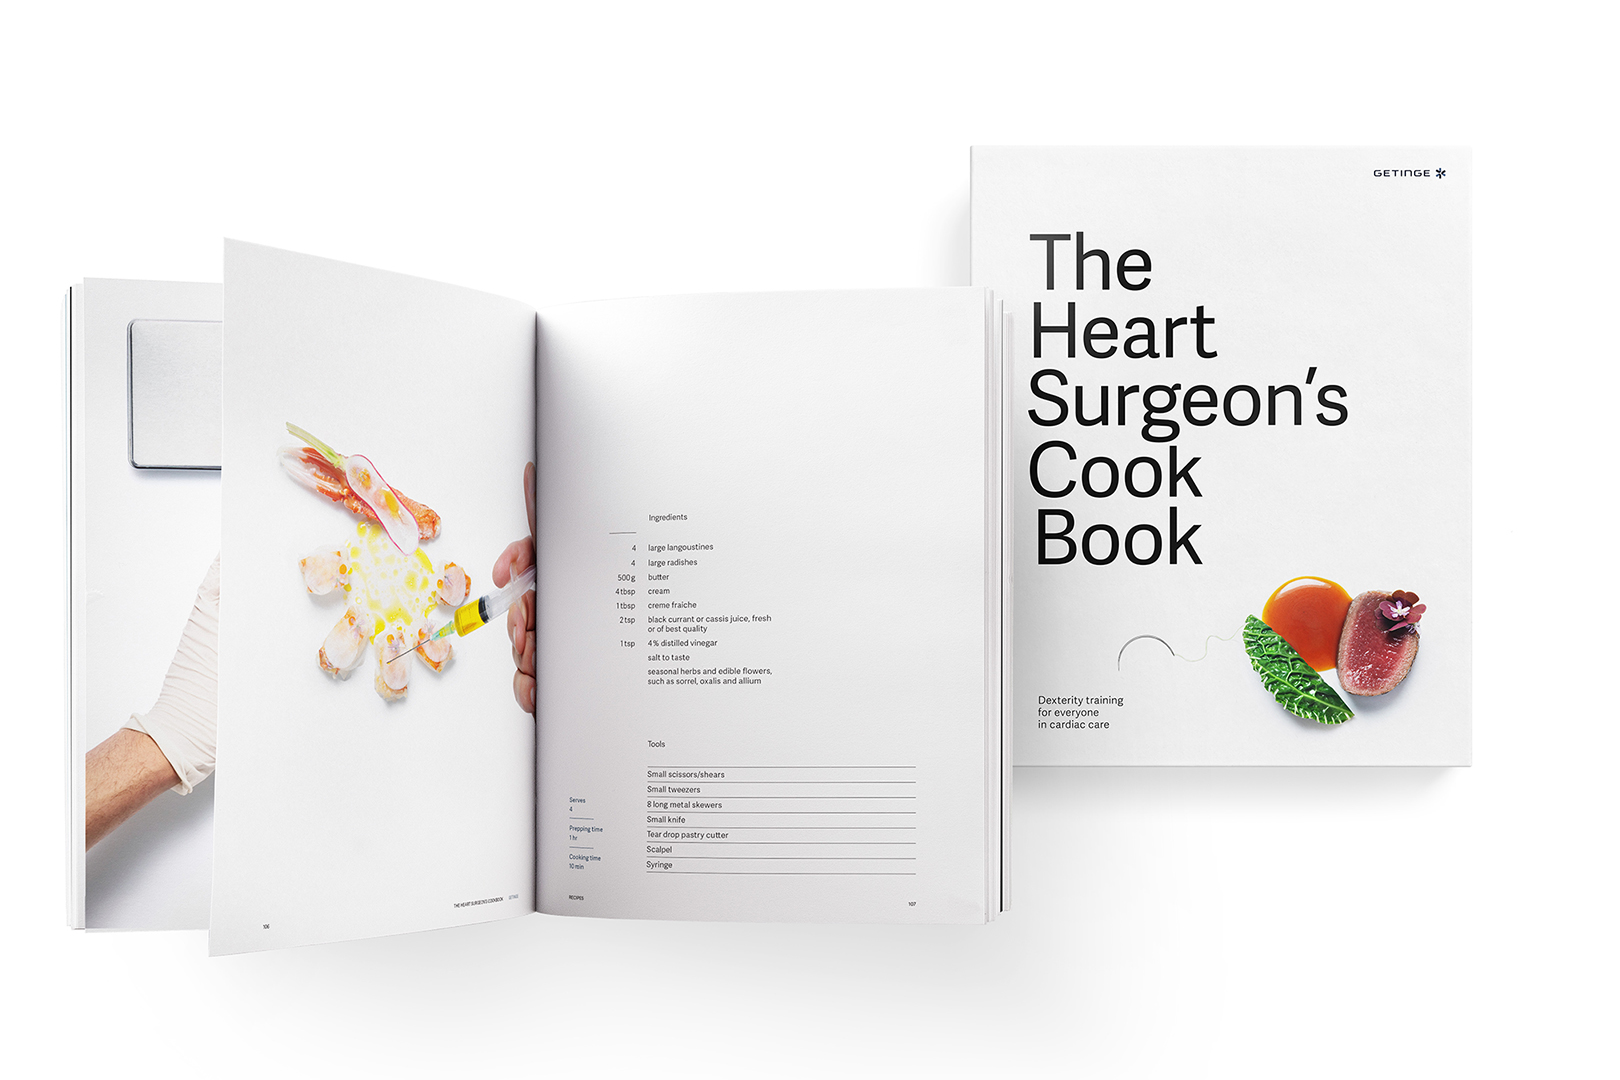 The Heart Surgeon’s Cookbook – A tribute to skilled hands